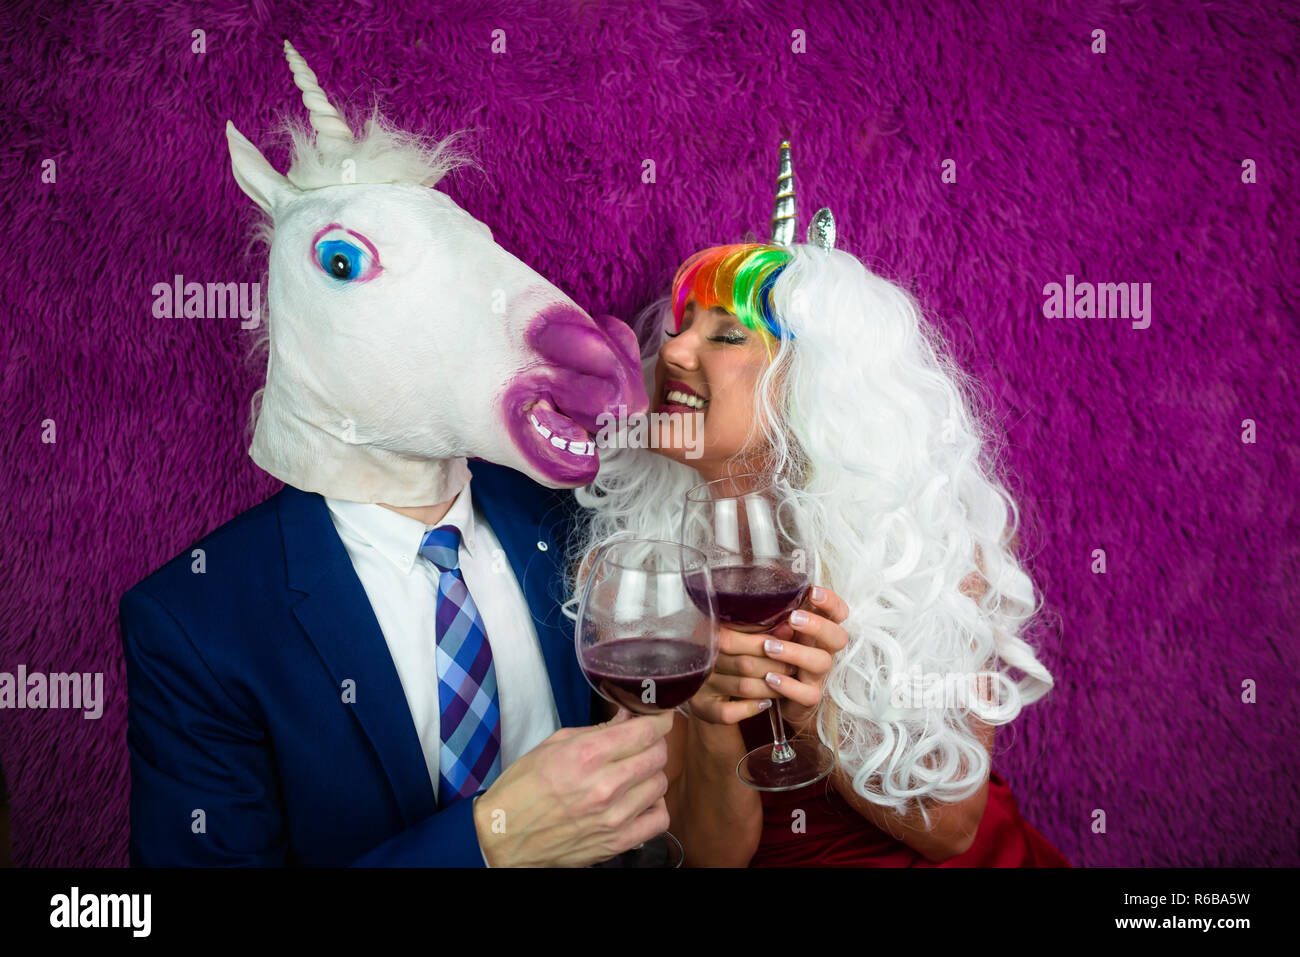 Portrait of strange couple on purple background. Freaky young woman in unusual wig drinking wine with man in mask and suit. Unicorn with girlfriend. Stock Photo